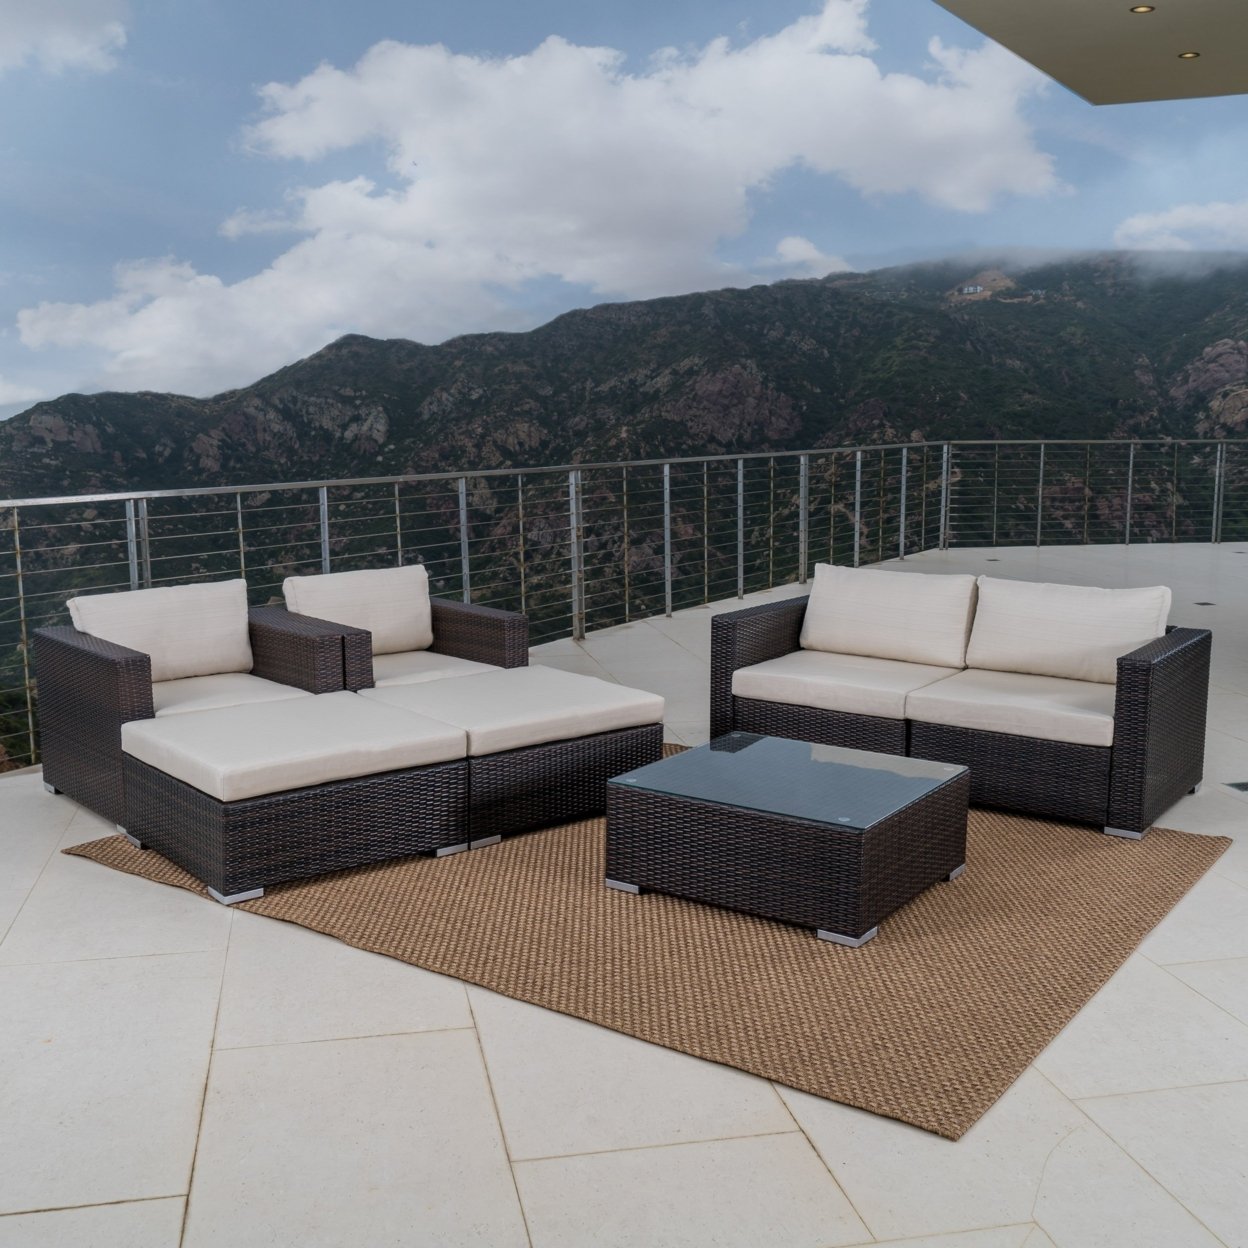 Francisco Outdoor Wicker Sectional With Cushions - Multibrown/Beige, 8 Piece Set